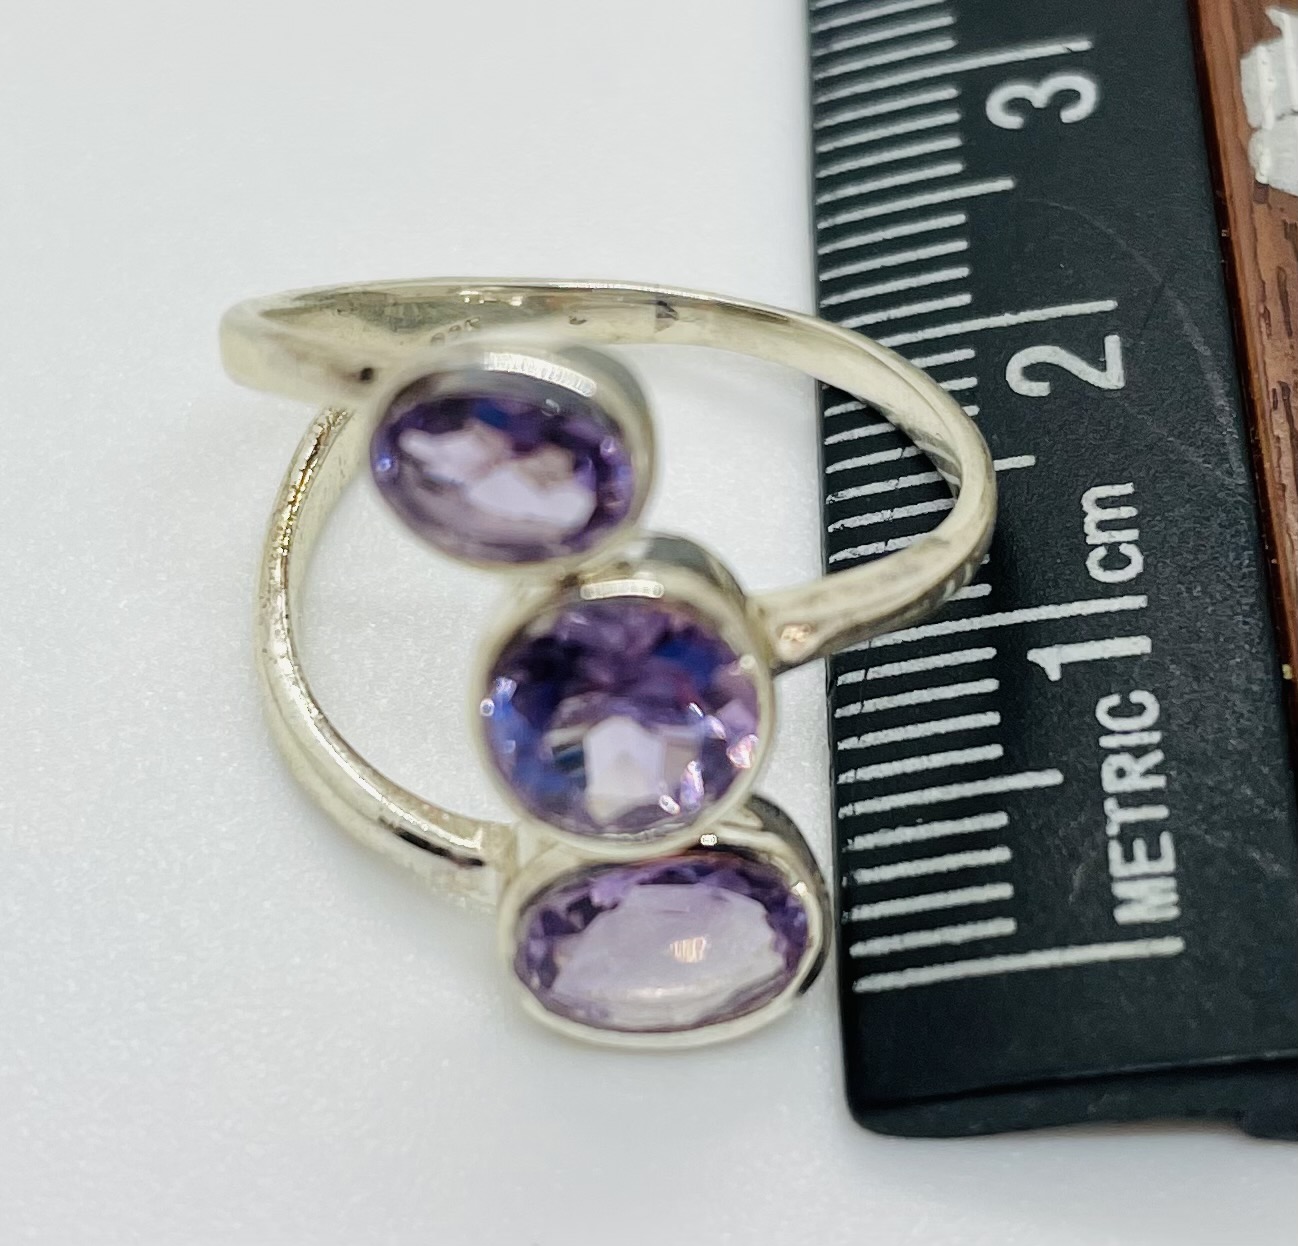 Amethyst Ring 3.18 Grams Size 7-9 (adjustable) - Click Image to Close